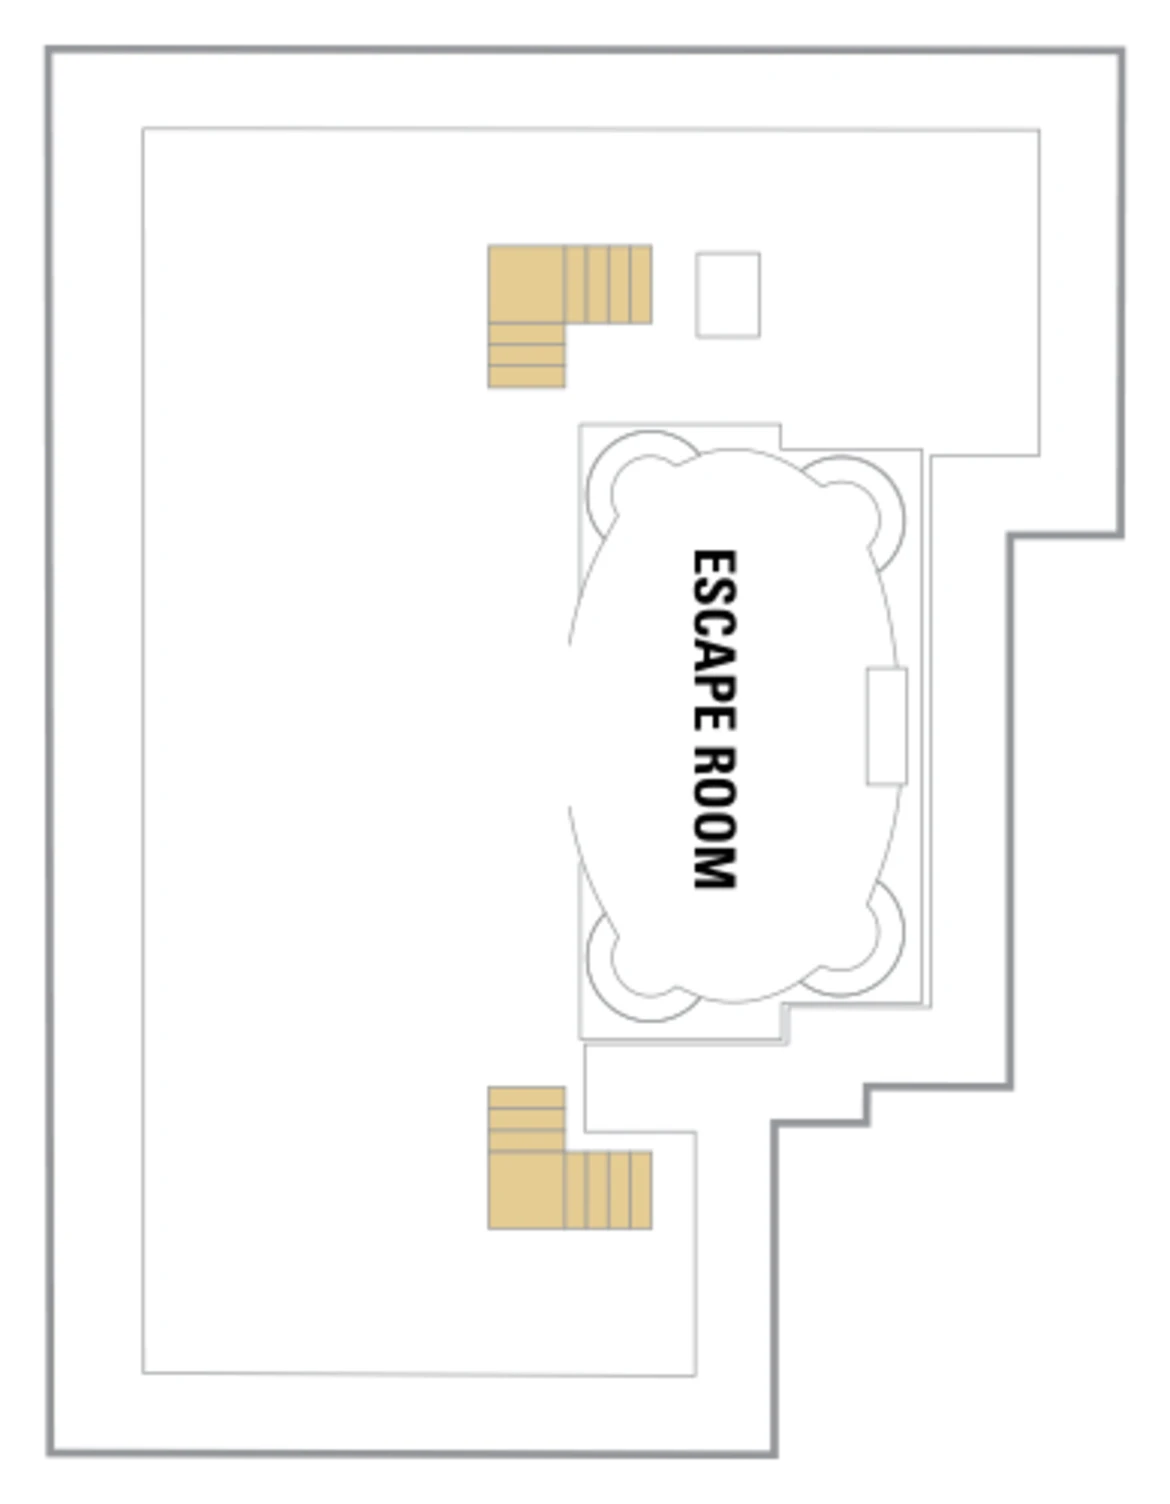 RCI Independence Of The Seas Deck Plan 15